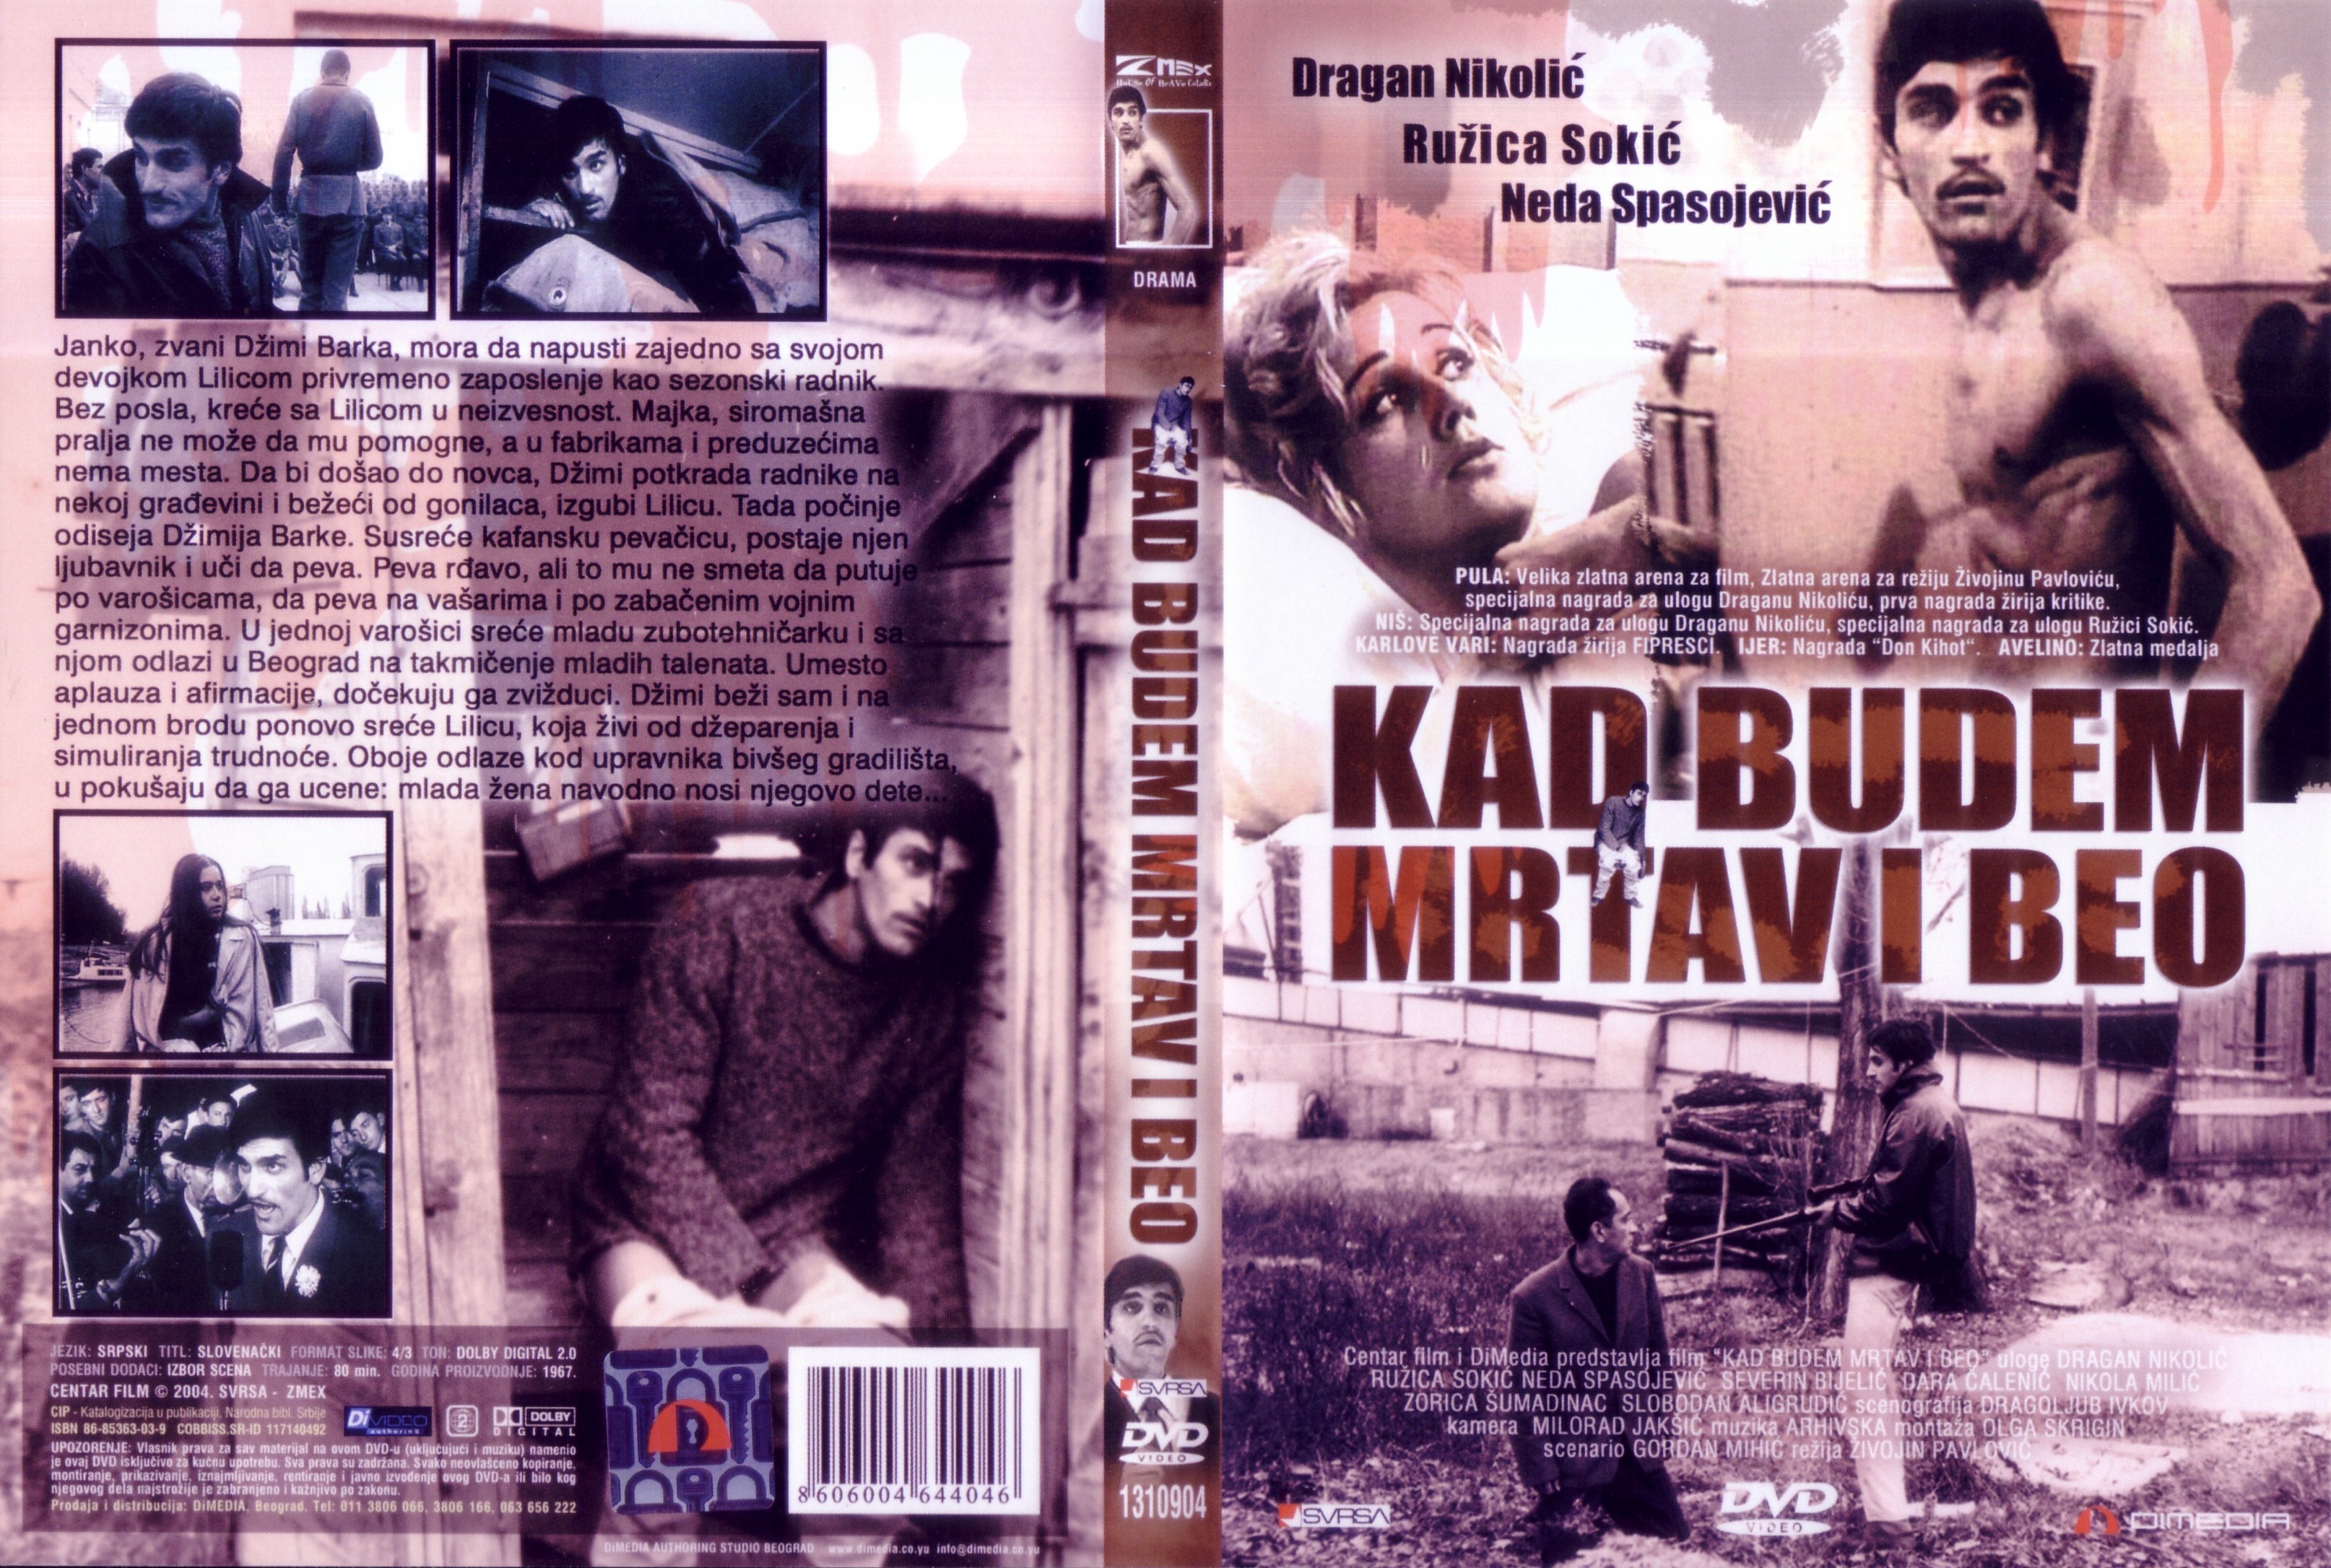 Click to view full size image -  DVD Cover - 0-9 - DVD - KAD BUDEM MRTAV I BEO - DVD - KAD BUDEM MRTAV I BEO.jpg